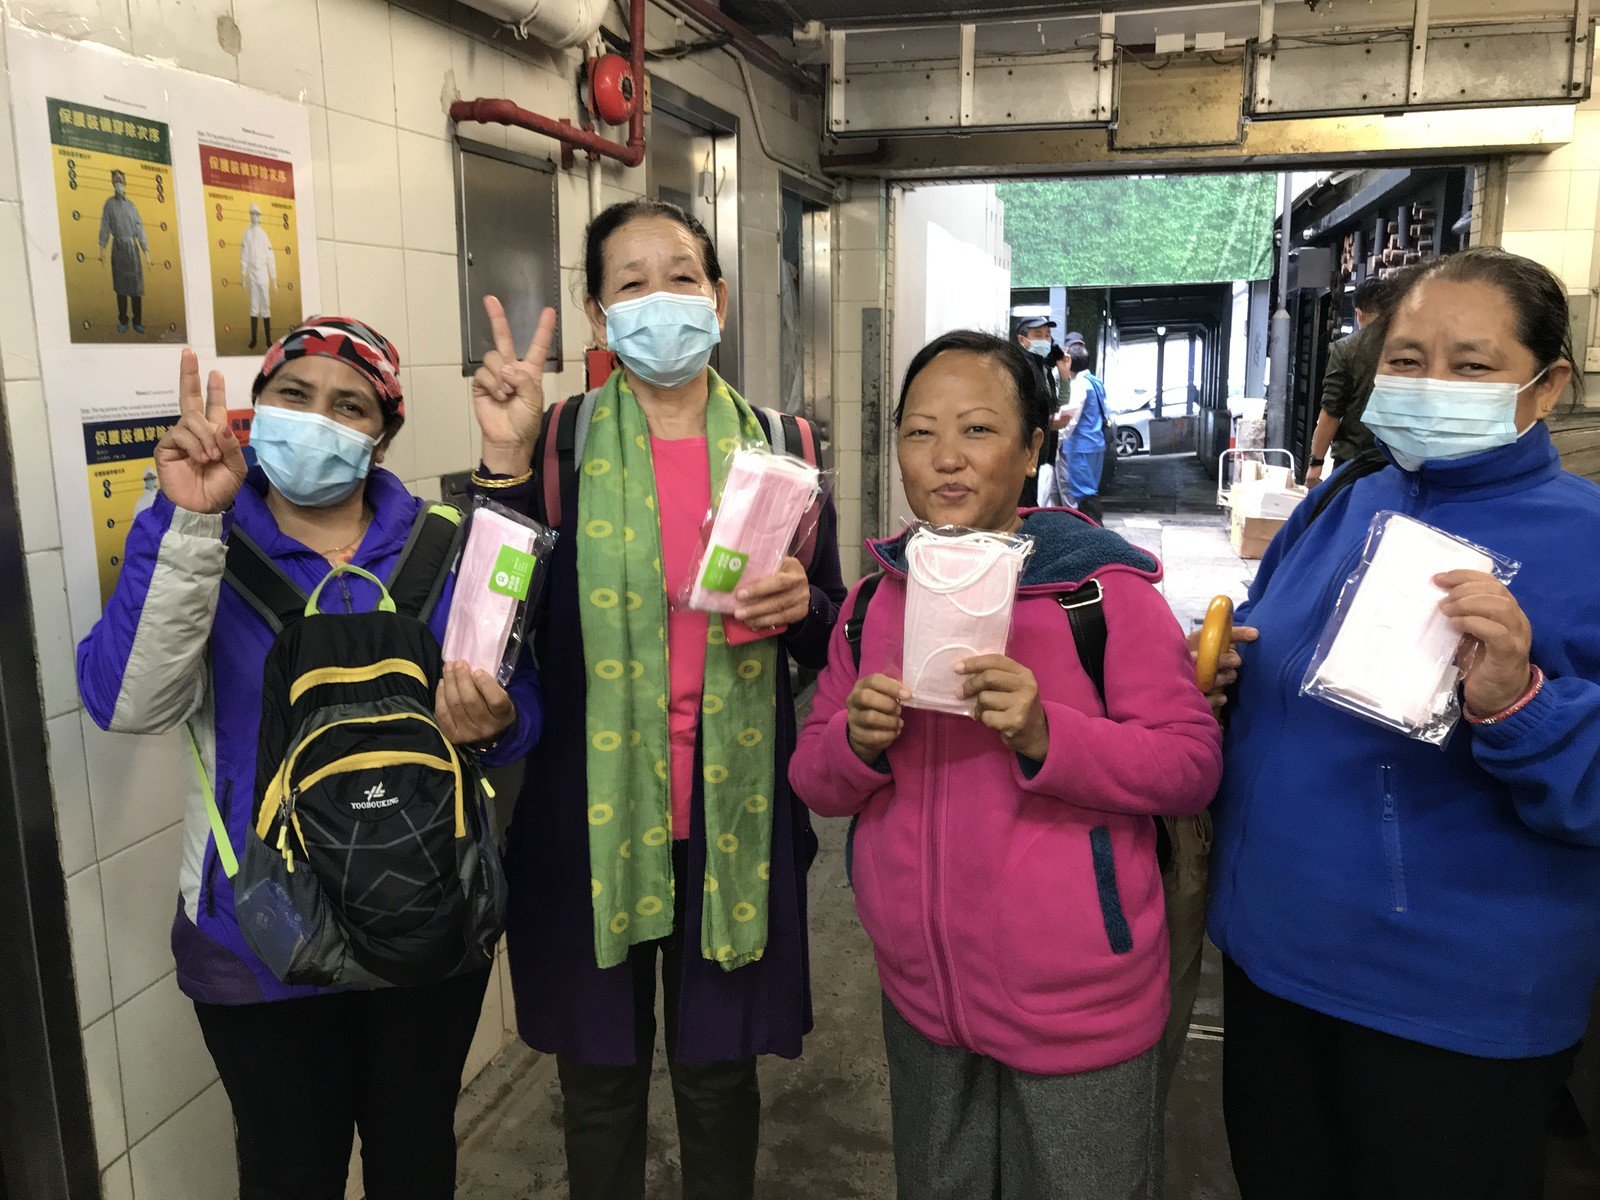 According to the Cleaning Workers’ Union, an estimated 20 per cent of outsourced government cleaners are ethnic minorities, and many of them are Nepalese. Oxfam Hong Kong staff recently distributed masks at the Lan Kwai Fong Refuse Collection point; most of the cleaners there were Nepalese women.